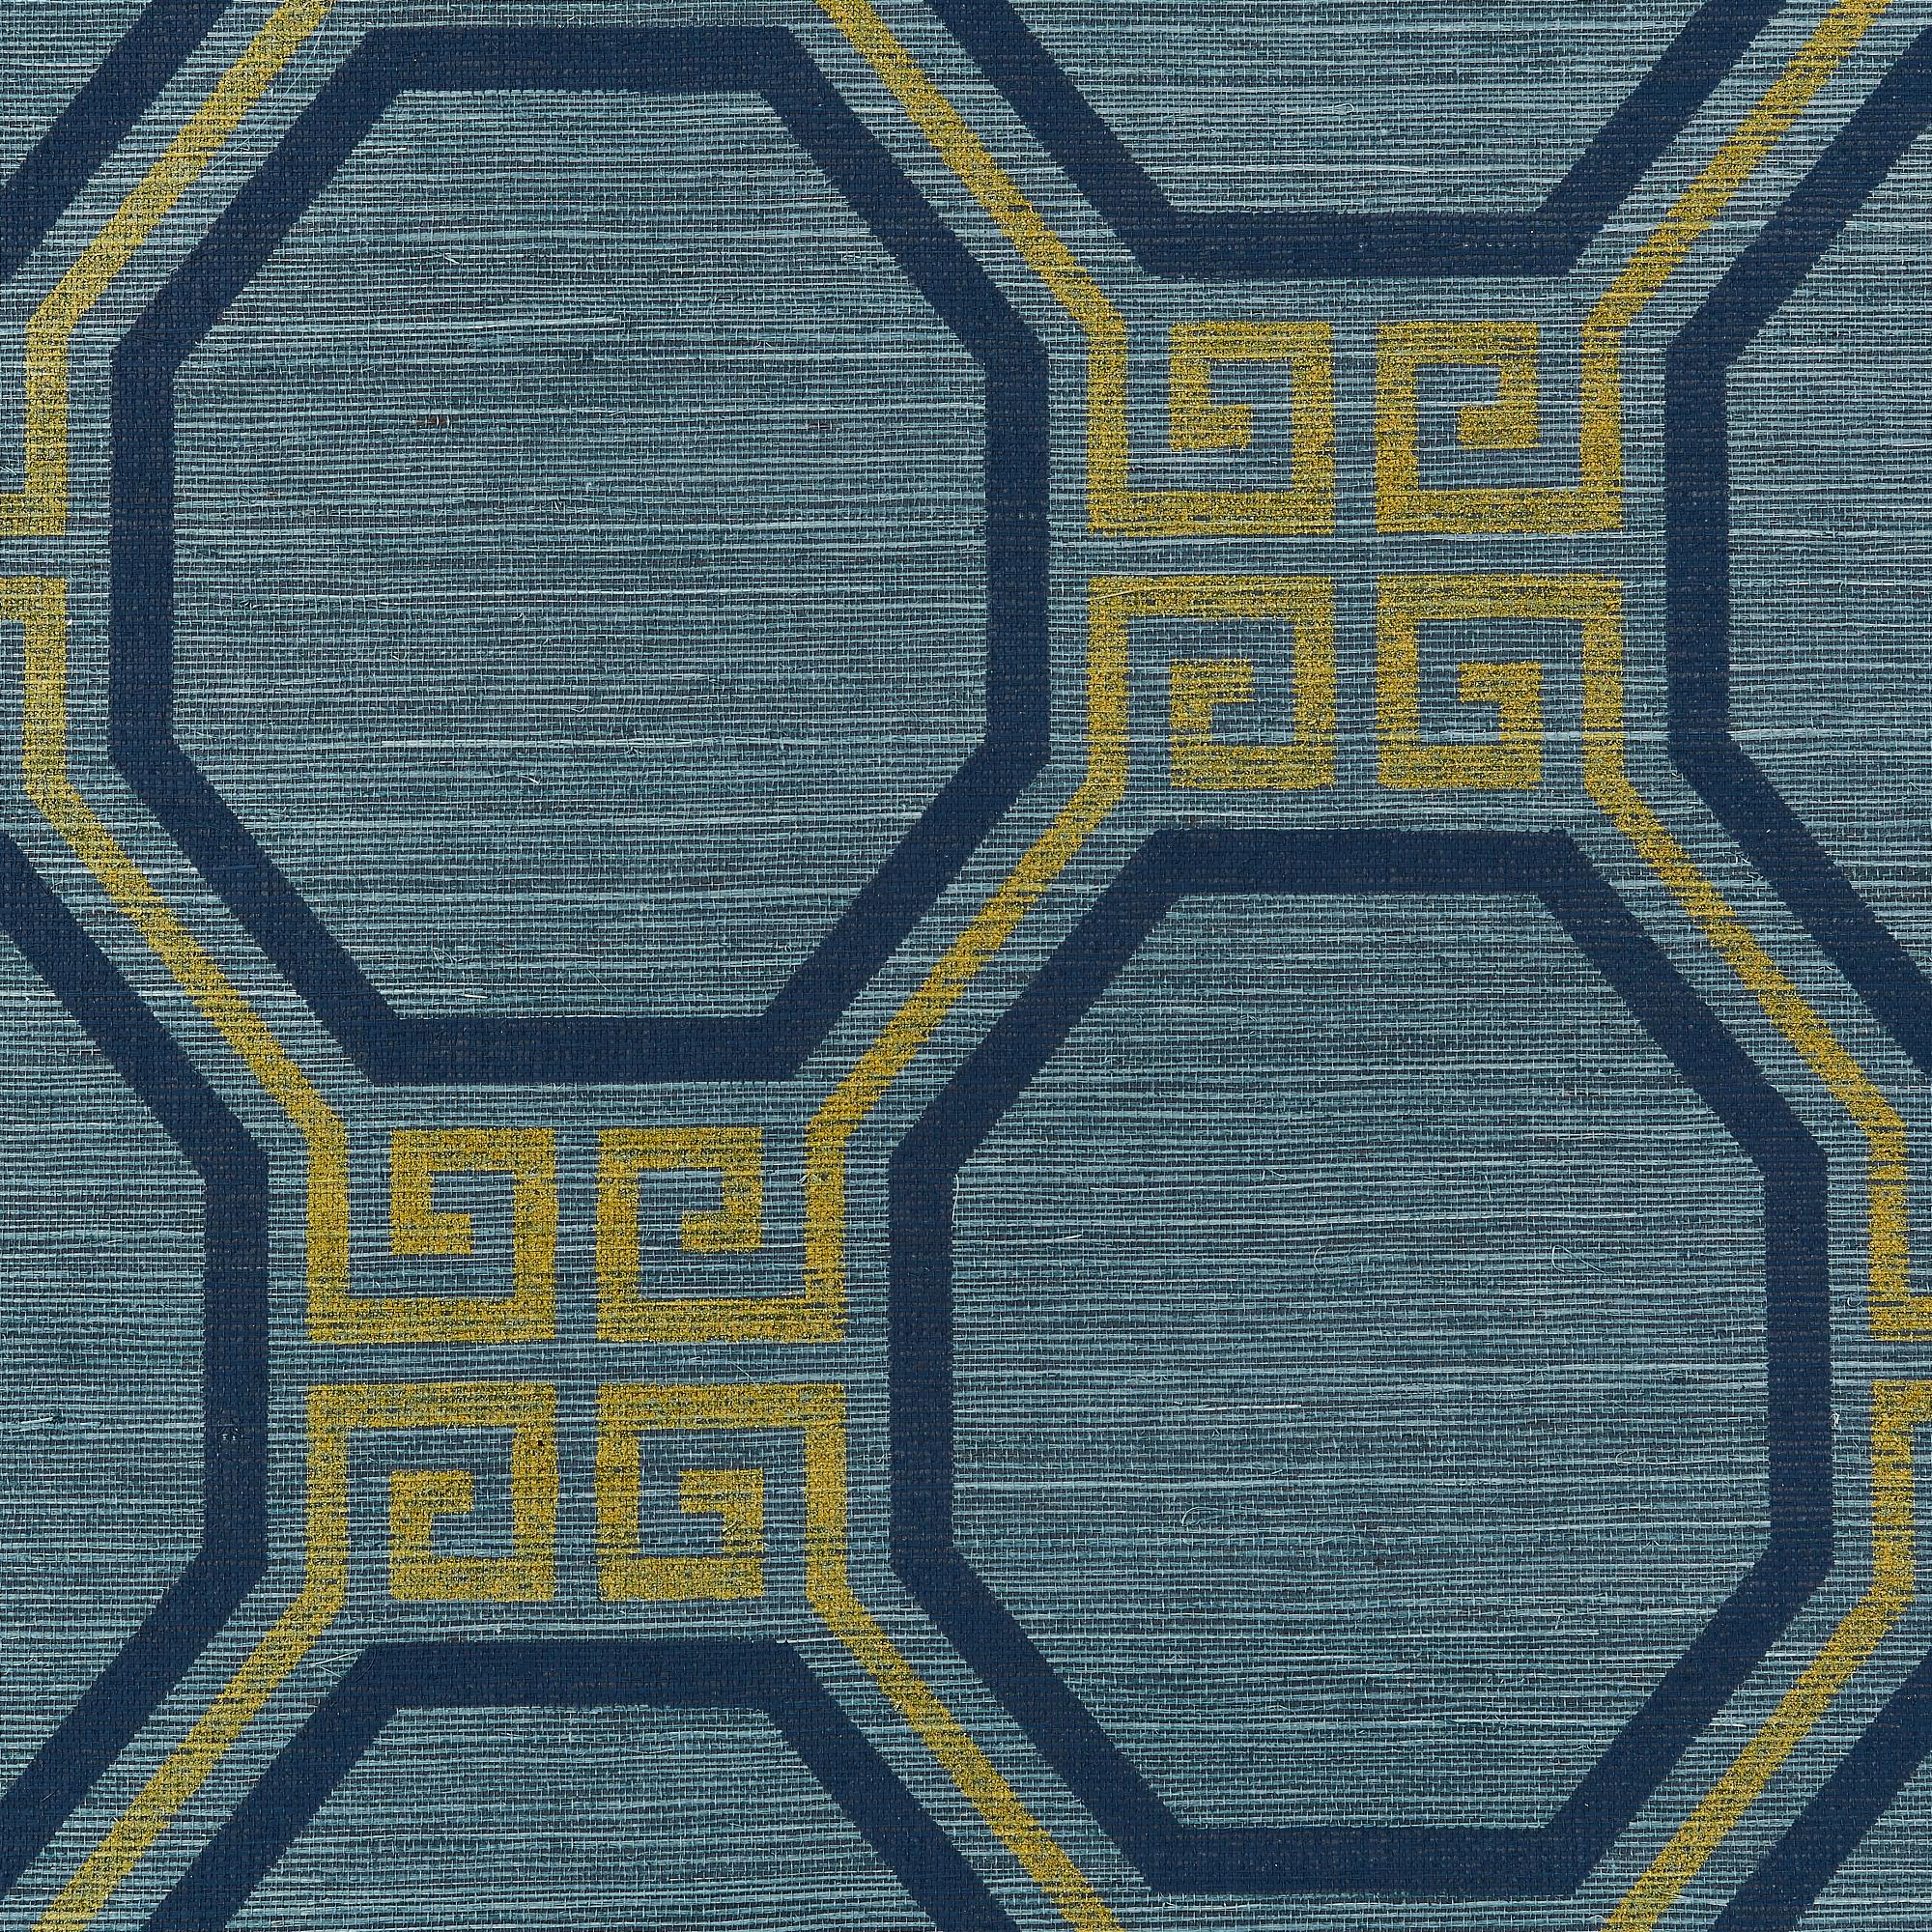 An eye-catching octagonal pattern accented with Greek keys, Octavia takes on a different look depending on whether it's printed on a sisal, paperweave or metallic ground.

Since Schumacher was founded in 1889, our family-owned company has been